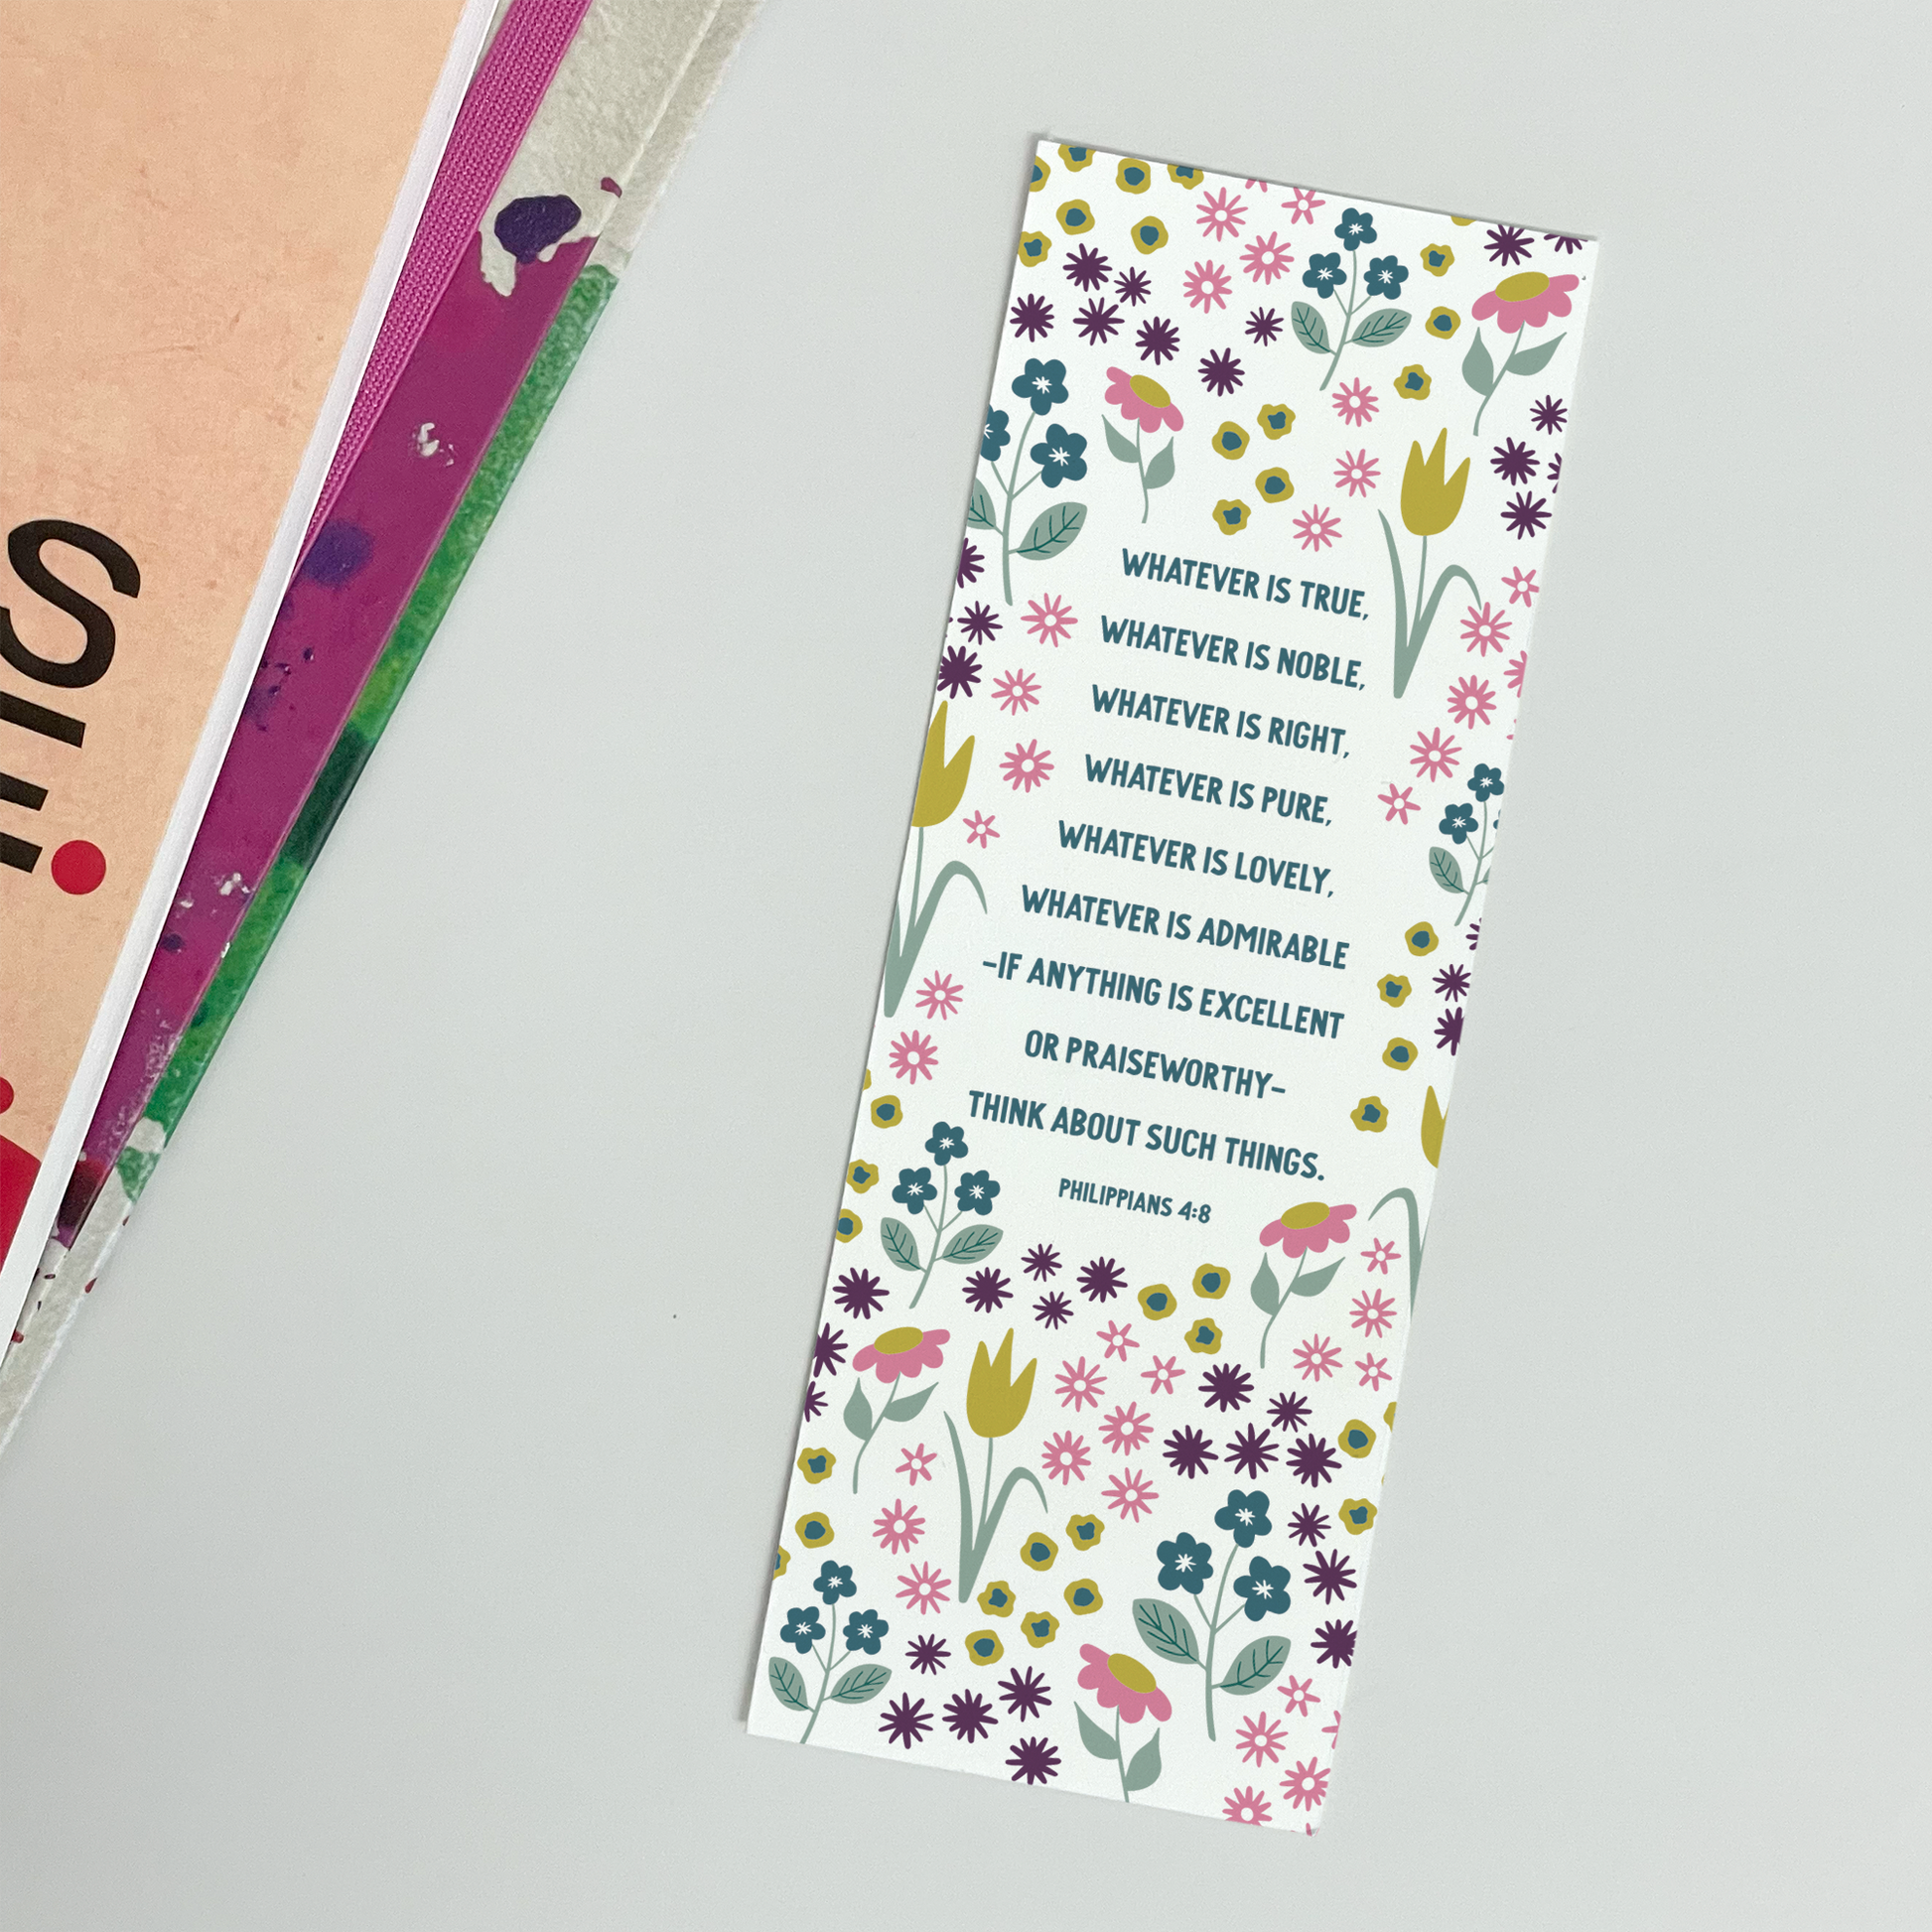 CHRISTIAN BOOKMARK GIFT - PHILIPPIANS 4:8 - THE WEE SPARROW